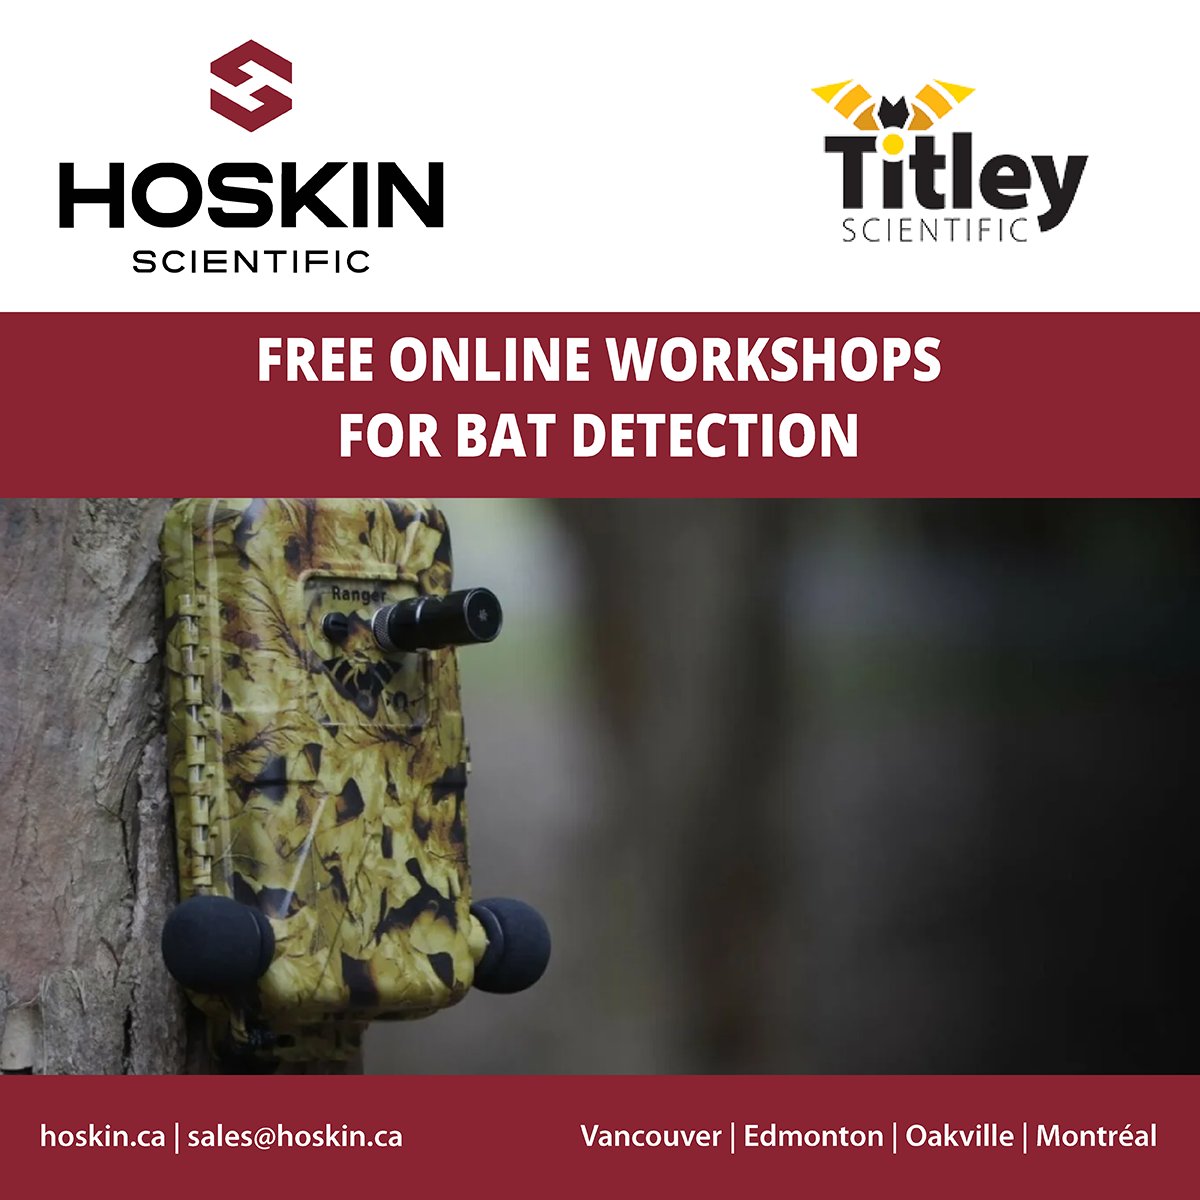 Titley Scientific has over 40 years experience developing acoustic technology for wildlife monitoring.  This May, register for a 30min Micro-Workshop: Deployment Techniques for Bat Detectors.
ow.ly/UZgV50QMwLh
#wildlifemonitoring #batdetection #animalacoustics